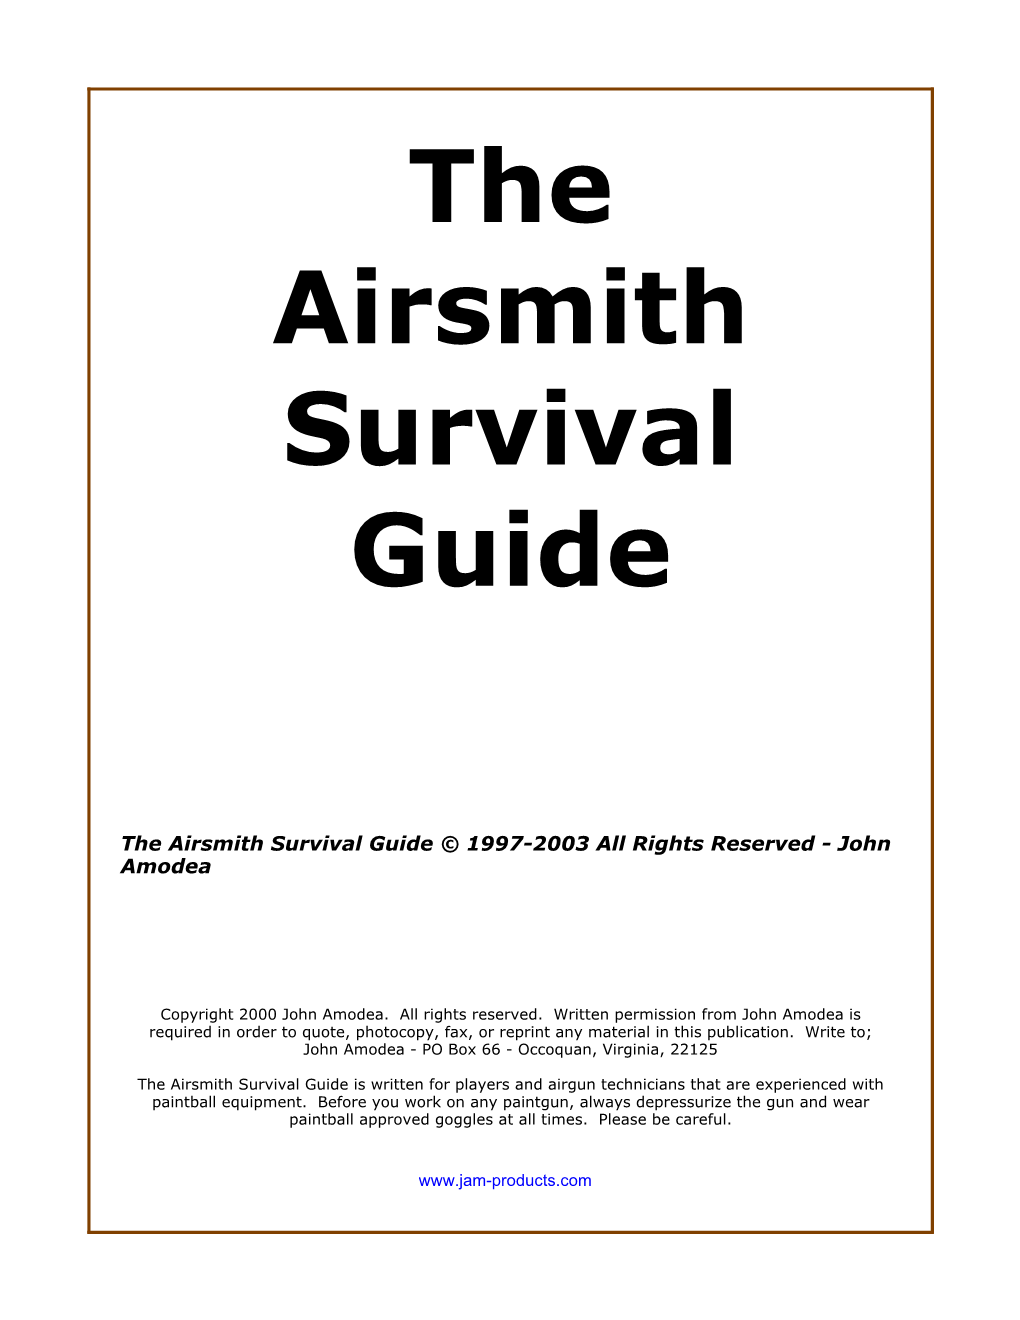 The Airsmith Survival Guide